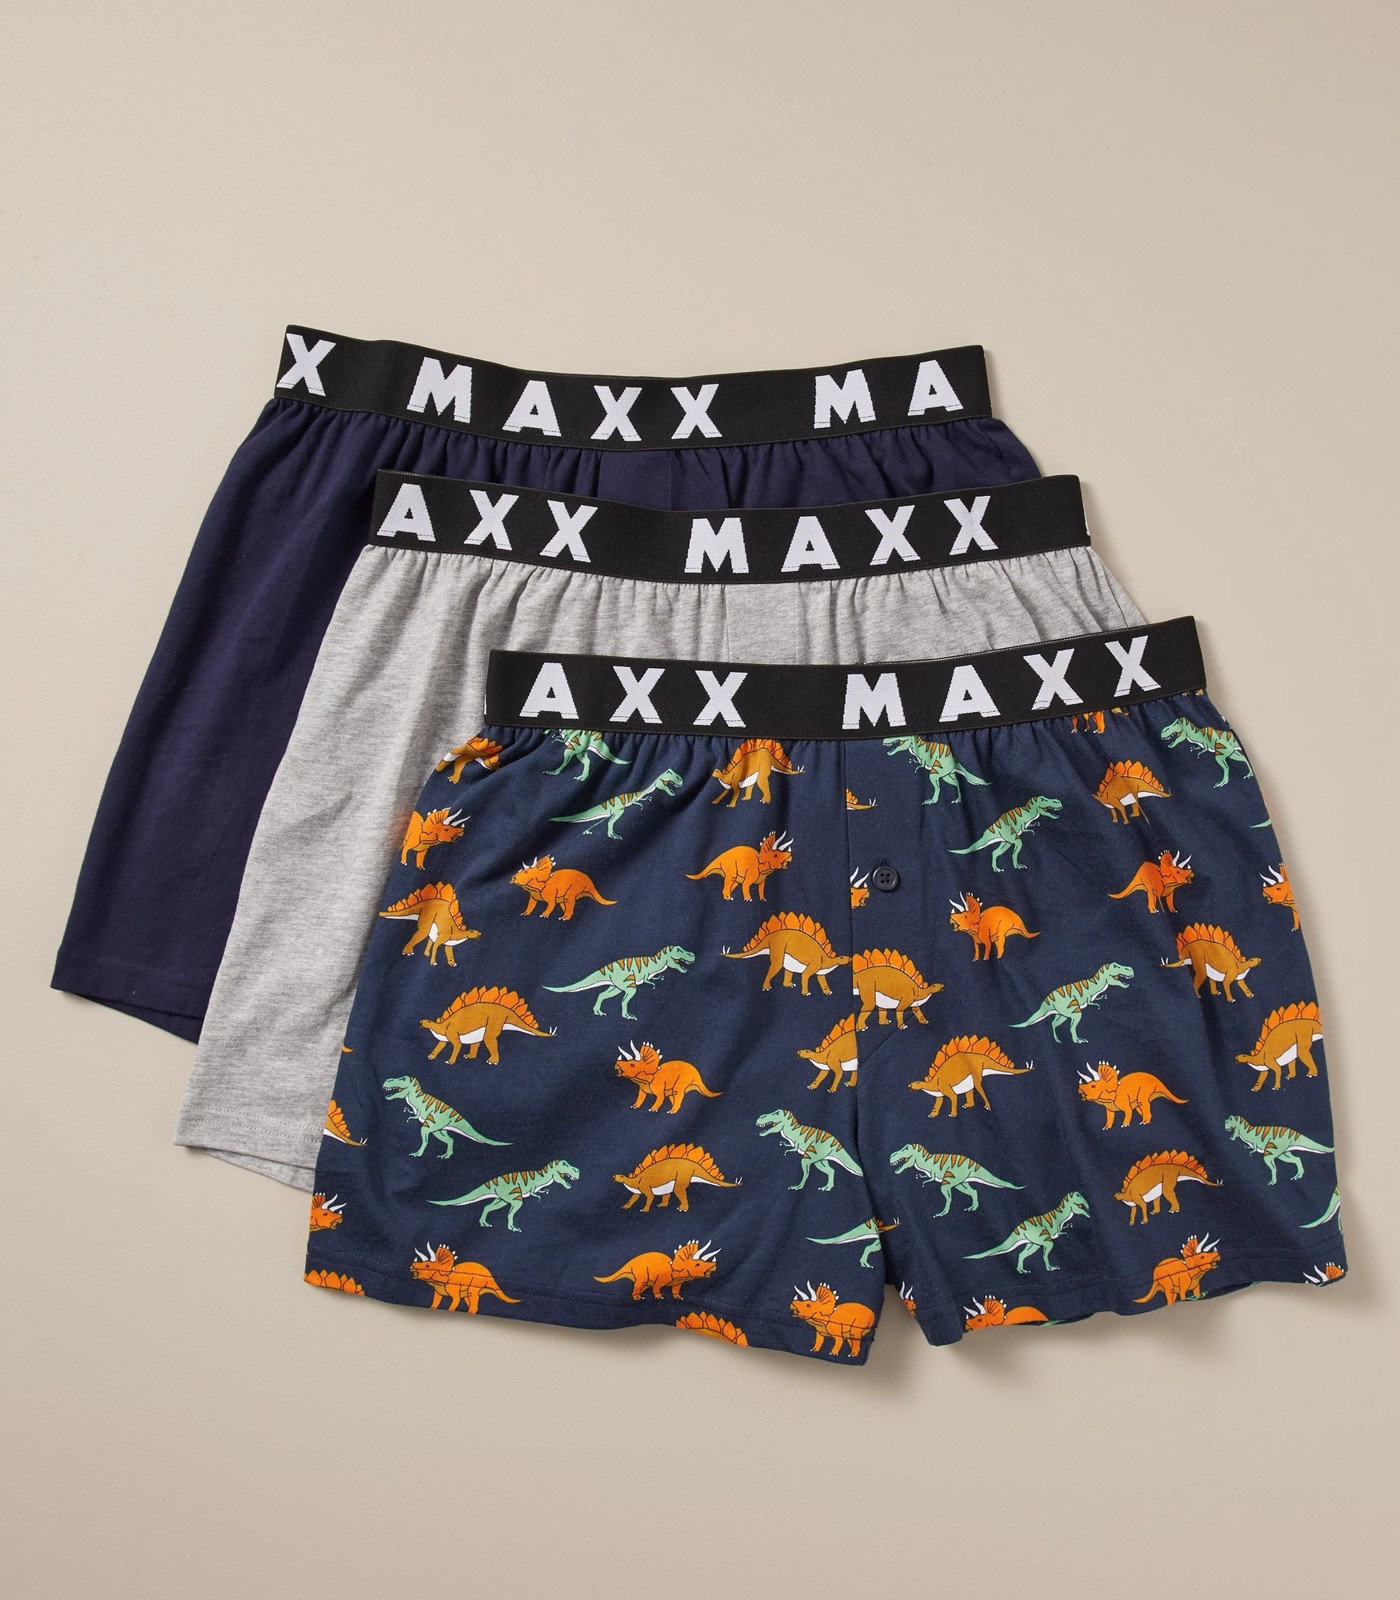 Maxx 3 Pack Knit Boxers